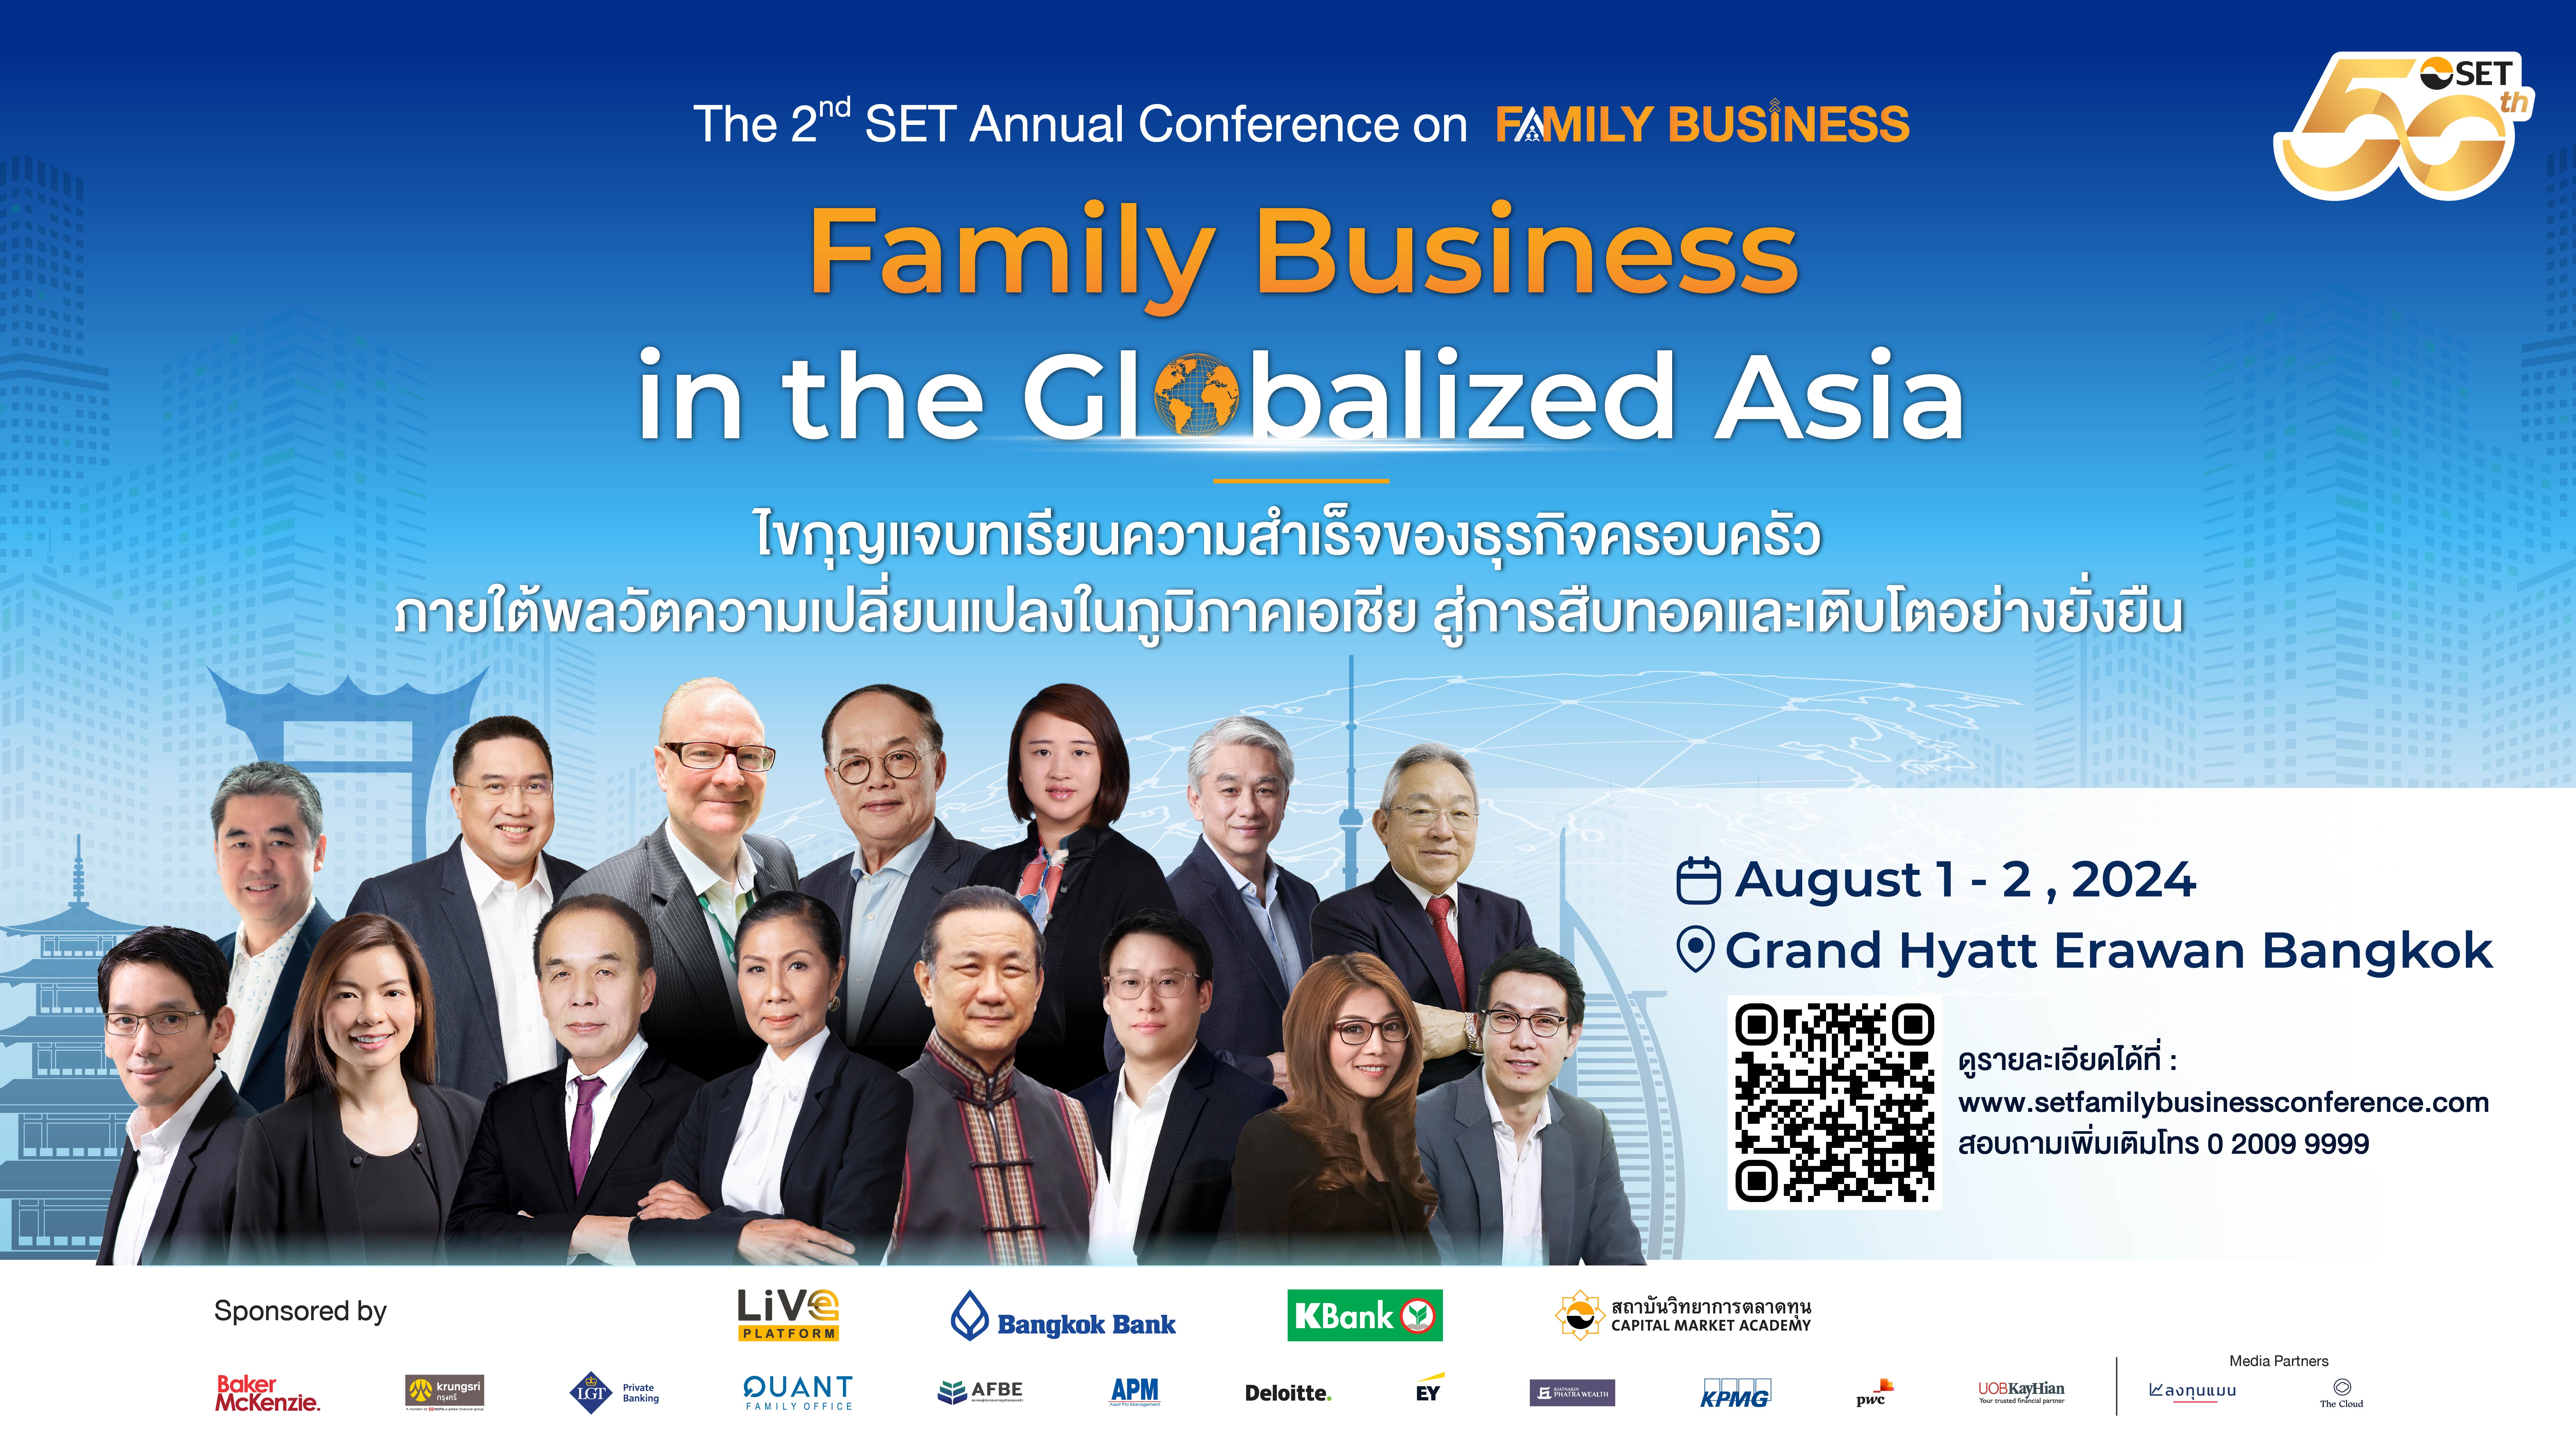 The 2nd SET Annual Conference on Family Business.jpg